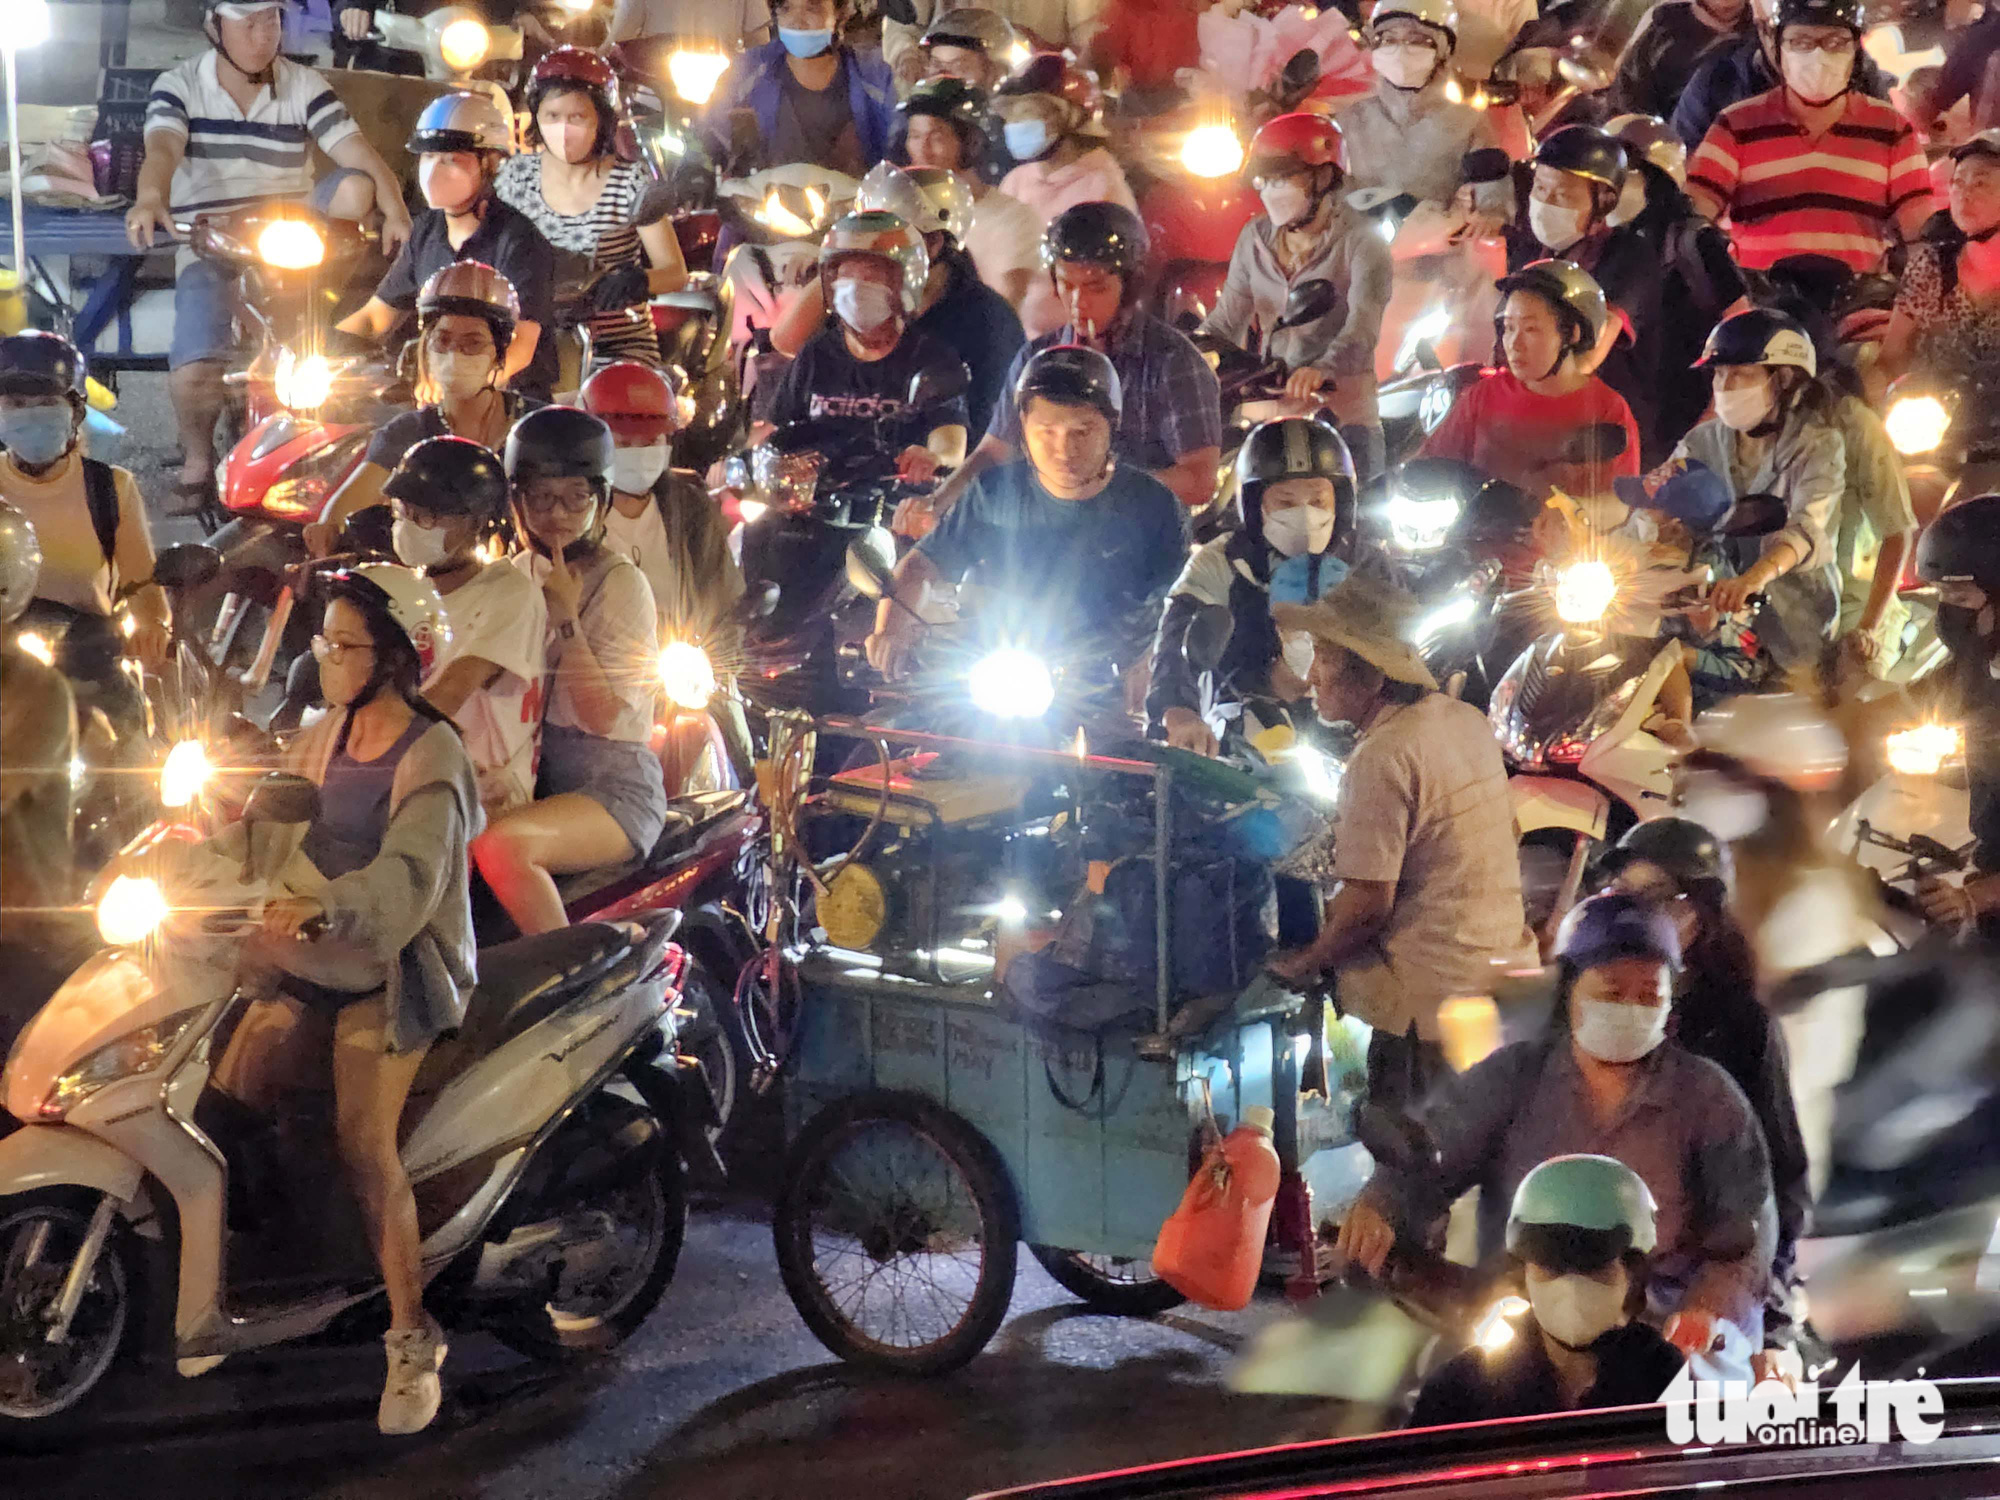 Traffic overload causes chaos in front of Ho Chi Minh City market during rush hour